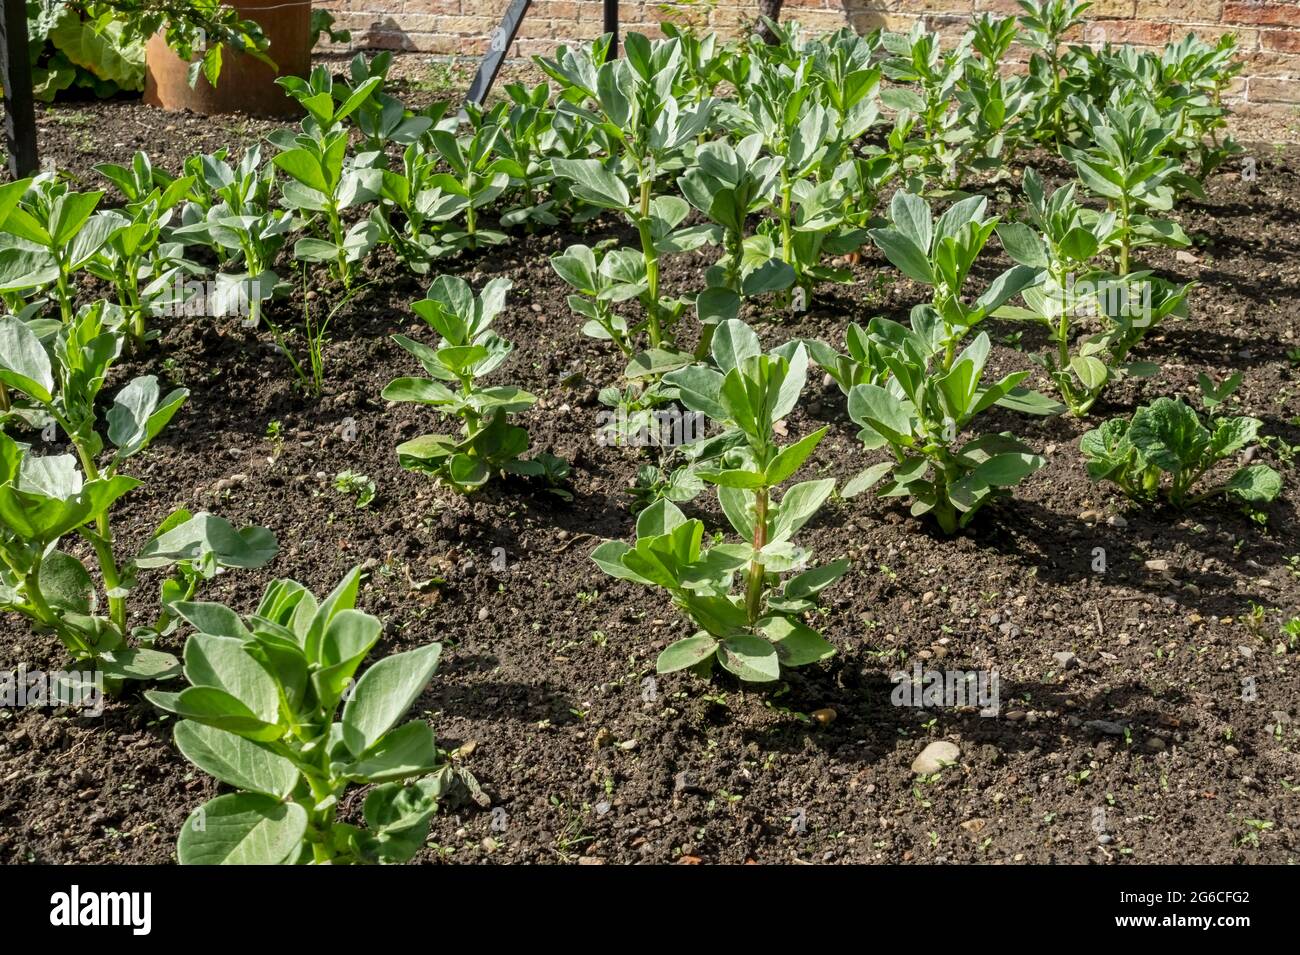 Rows of broad bean plants beans 'Super aquadulce' vegetable vegetables  growing in the garden in spring England UK United Kingdom GB Great Britain Stock Photo